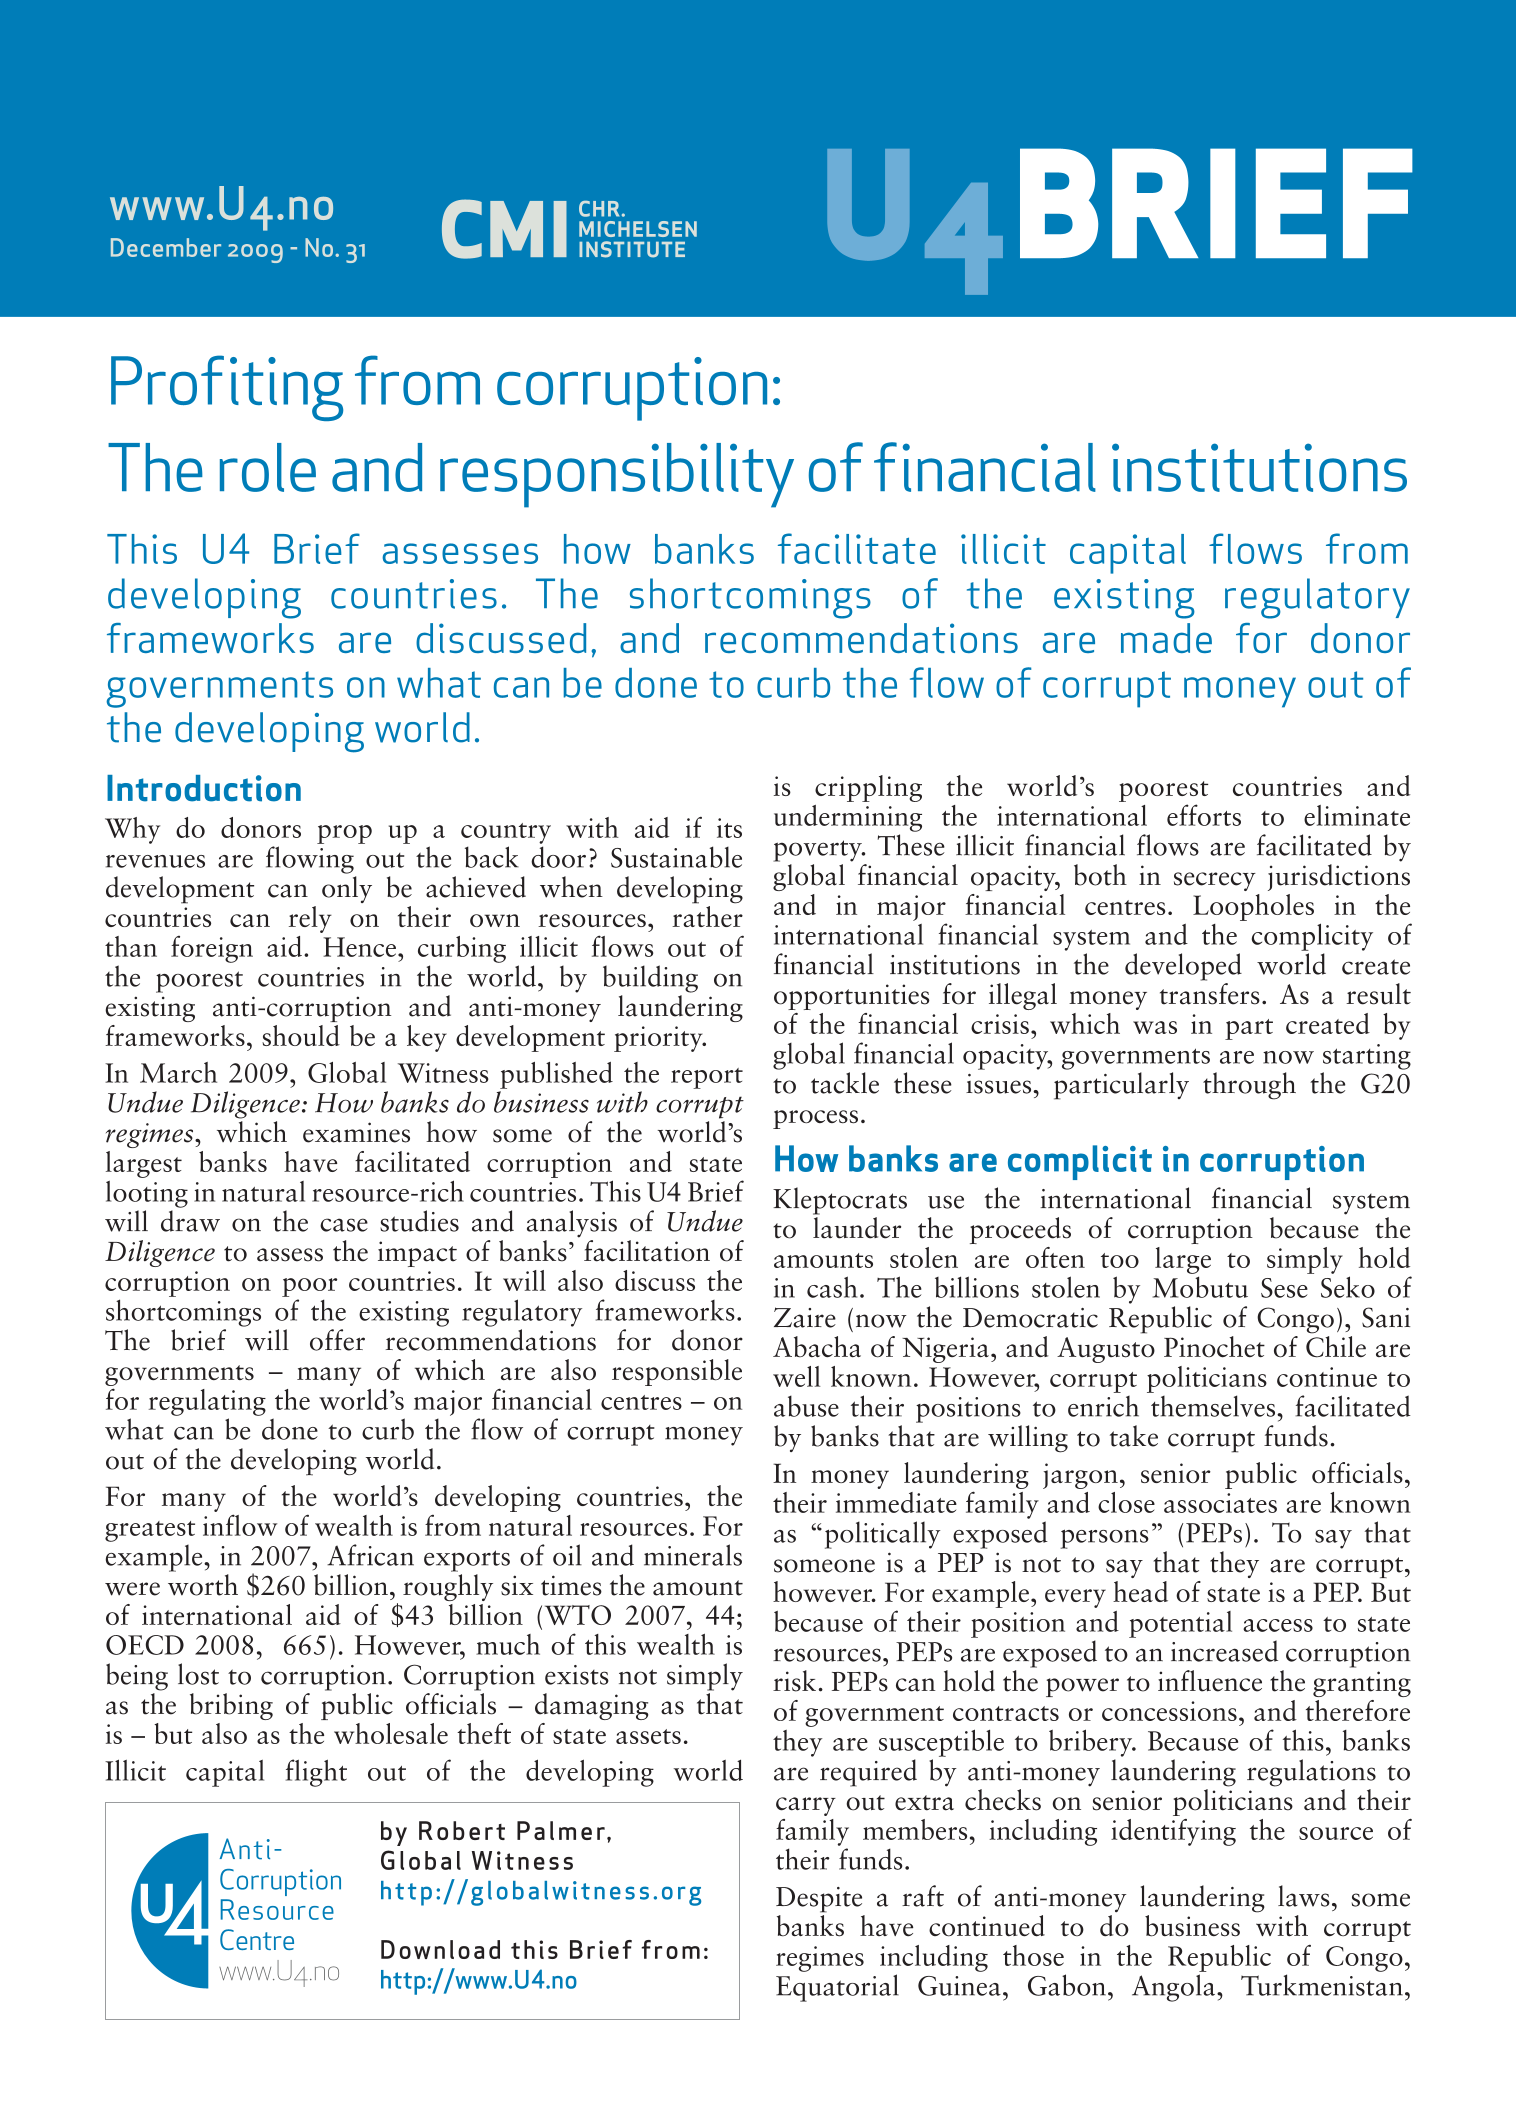 Profiting from corruption: The role and responsibility of financial institutions